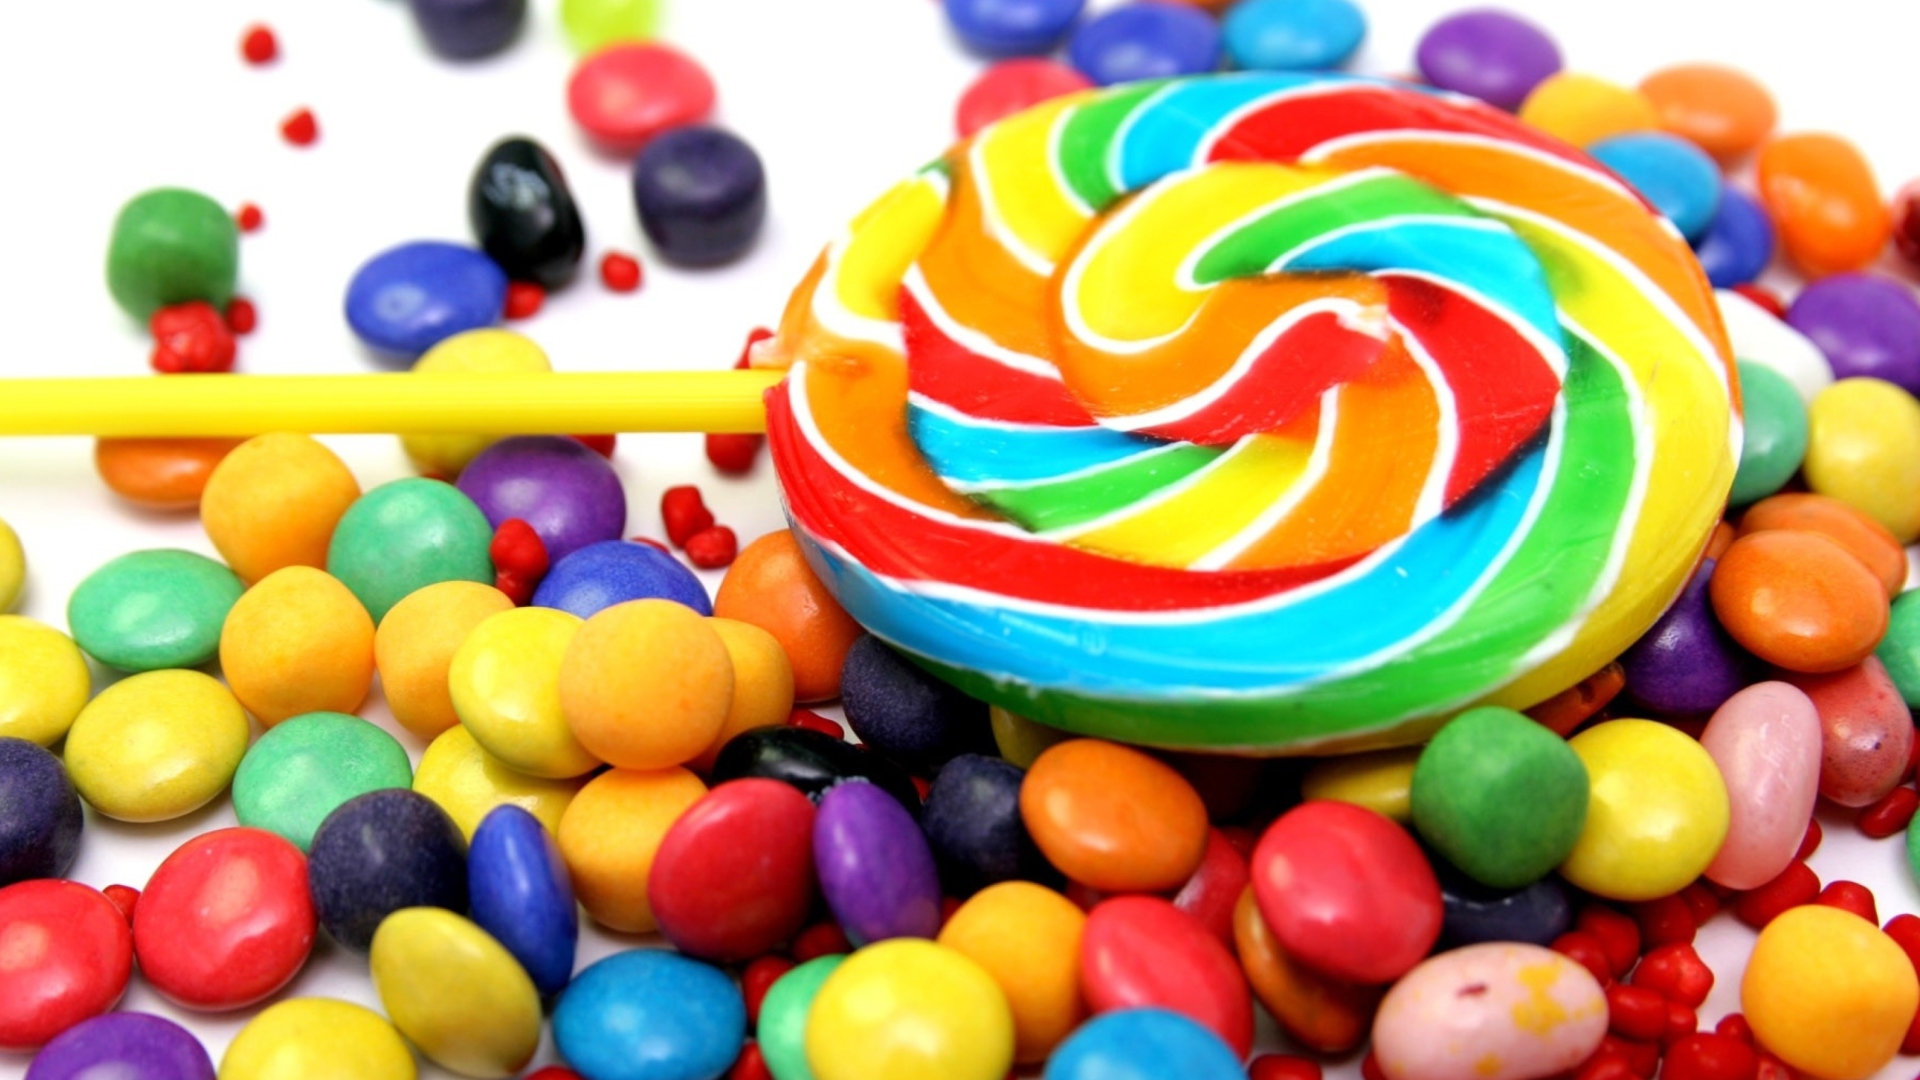 Colorful Candies wallpaper 1920x1080